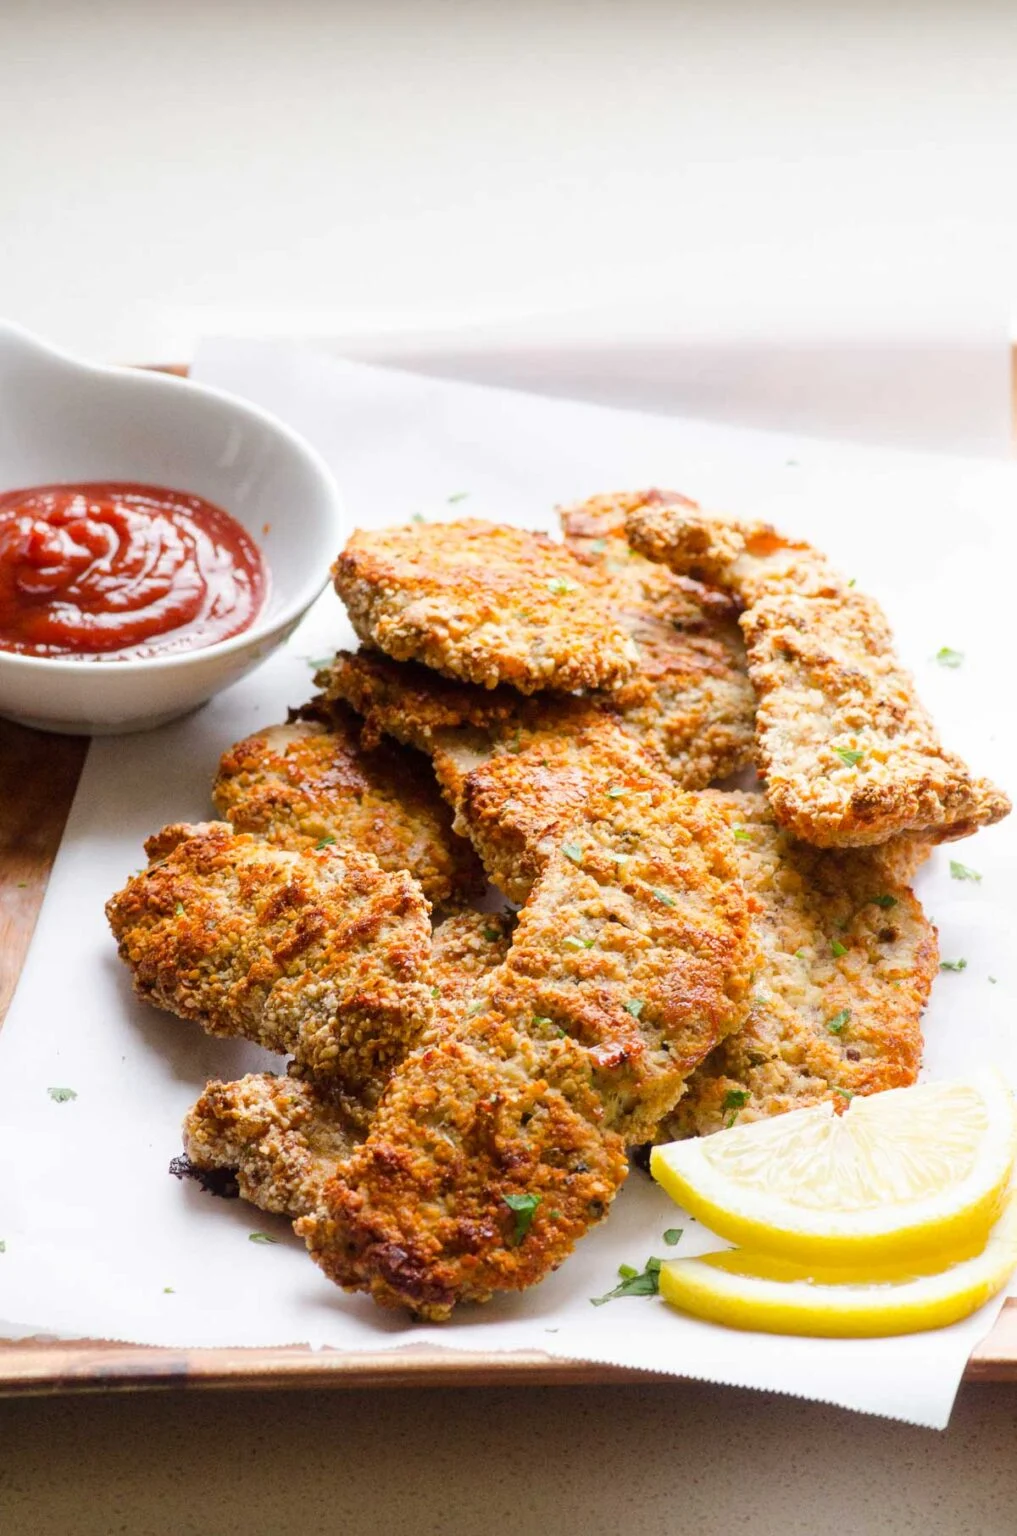 Chicken fried steaks with ketchup and lemon wedges on a wooden cutting board, perfect for chicken tender recipes.